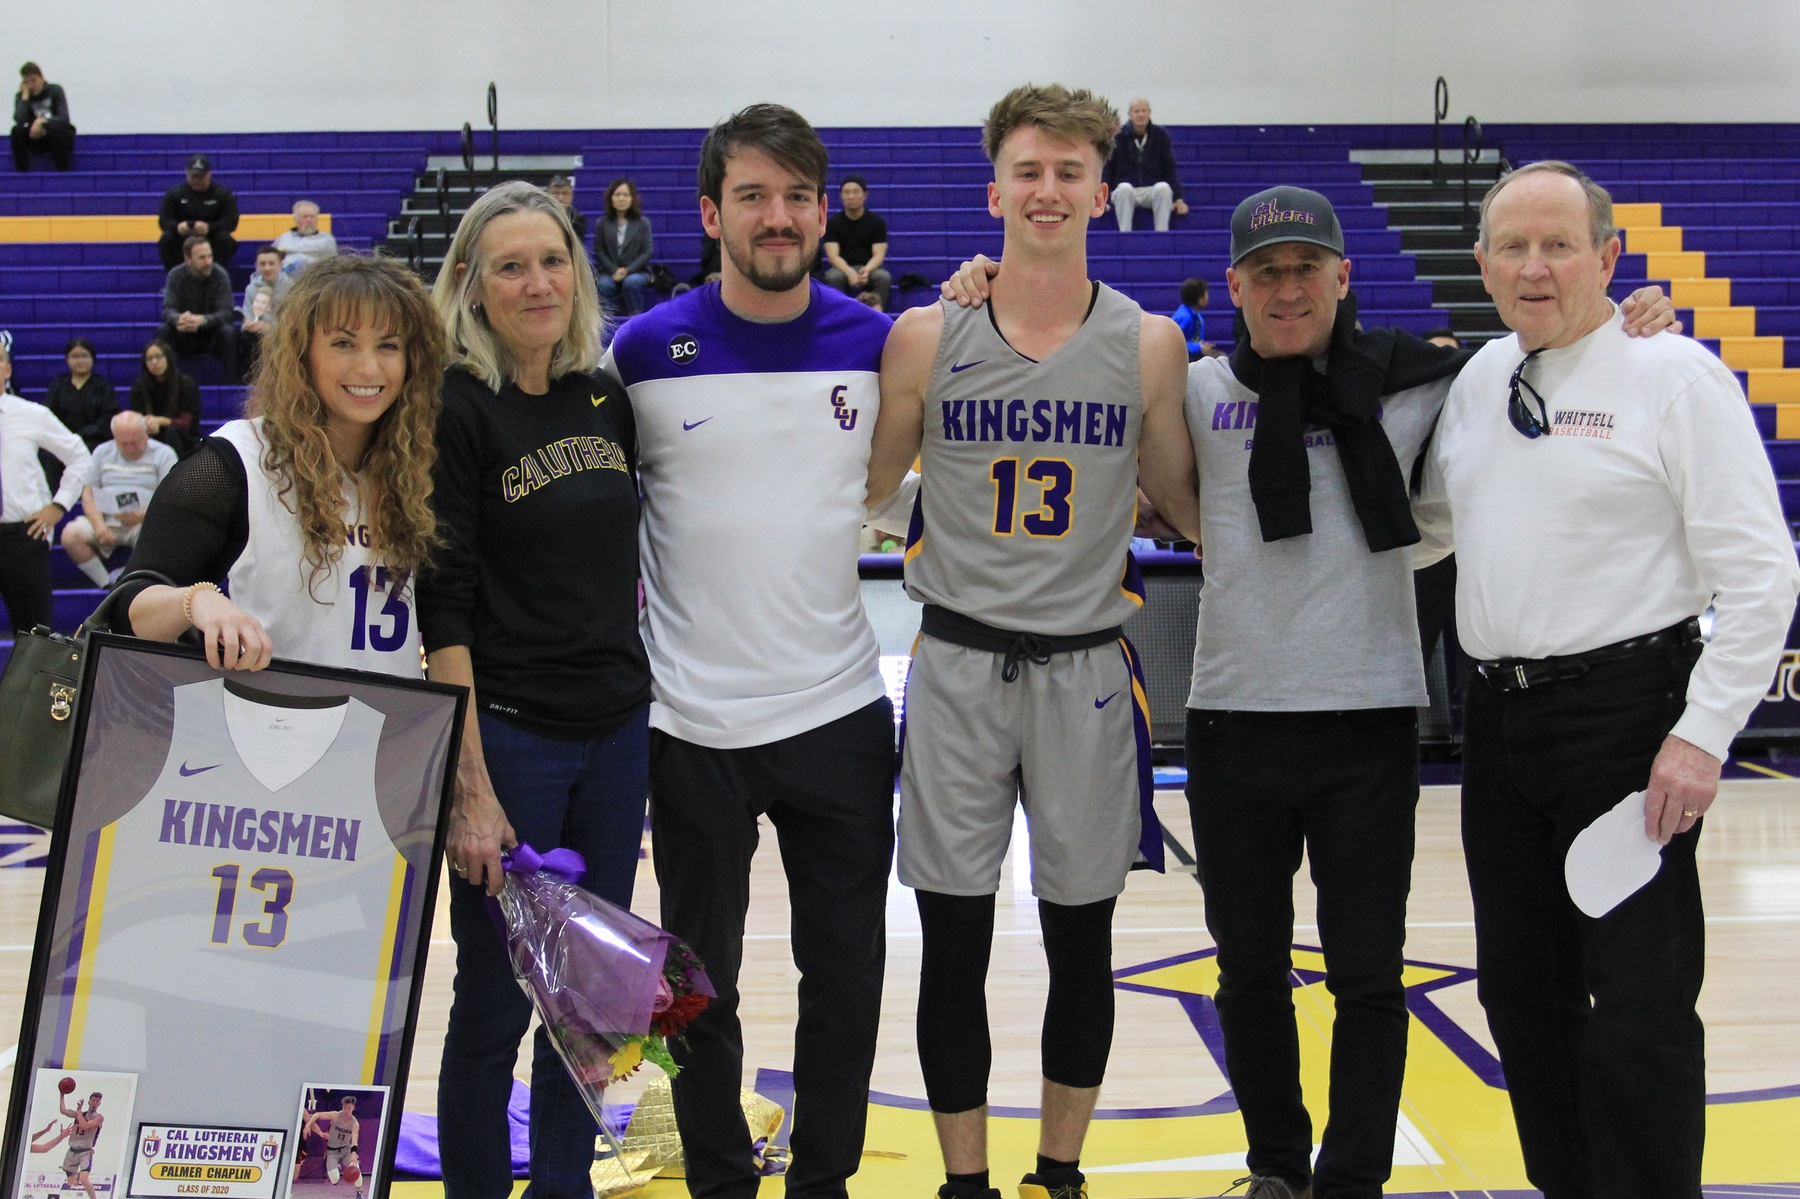 Palmer Chaplin is accompanied with his family and friends on senior night. (Photo: Gabby Flores)